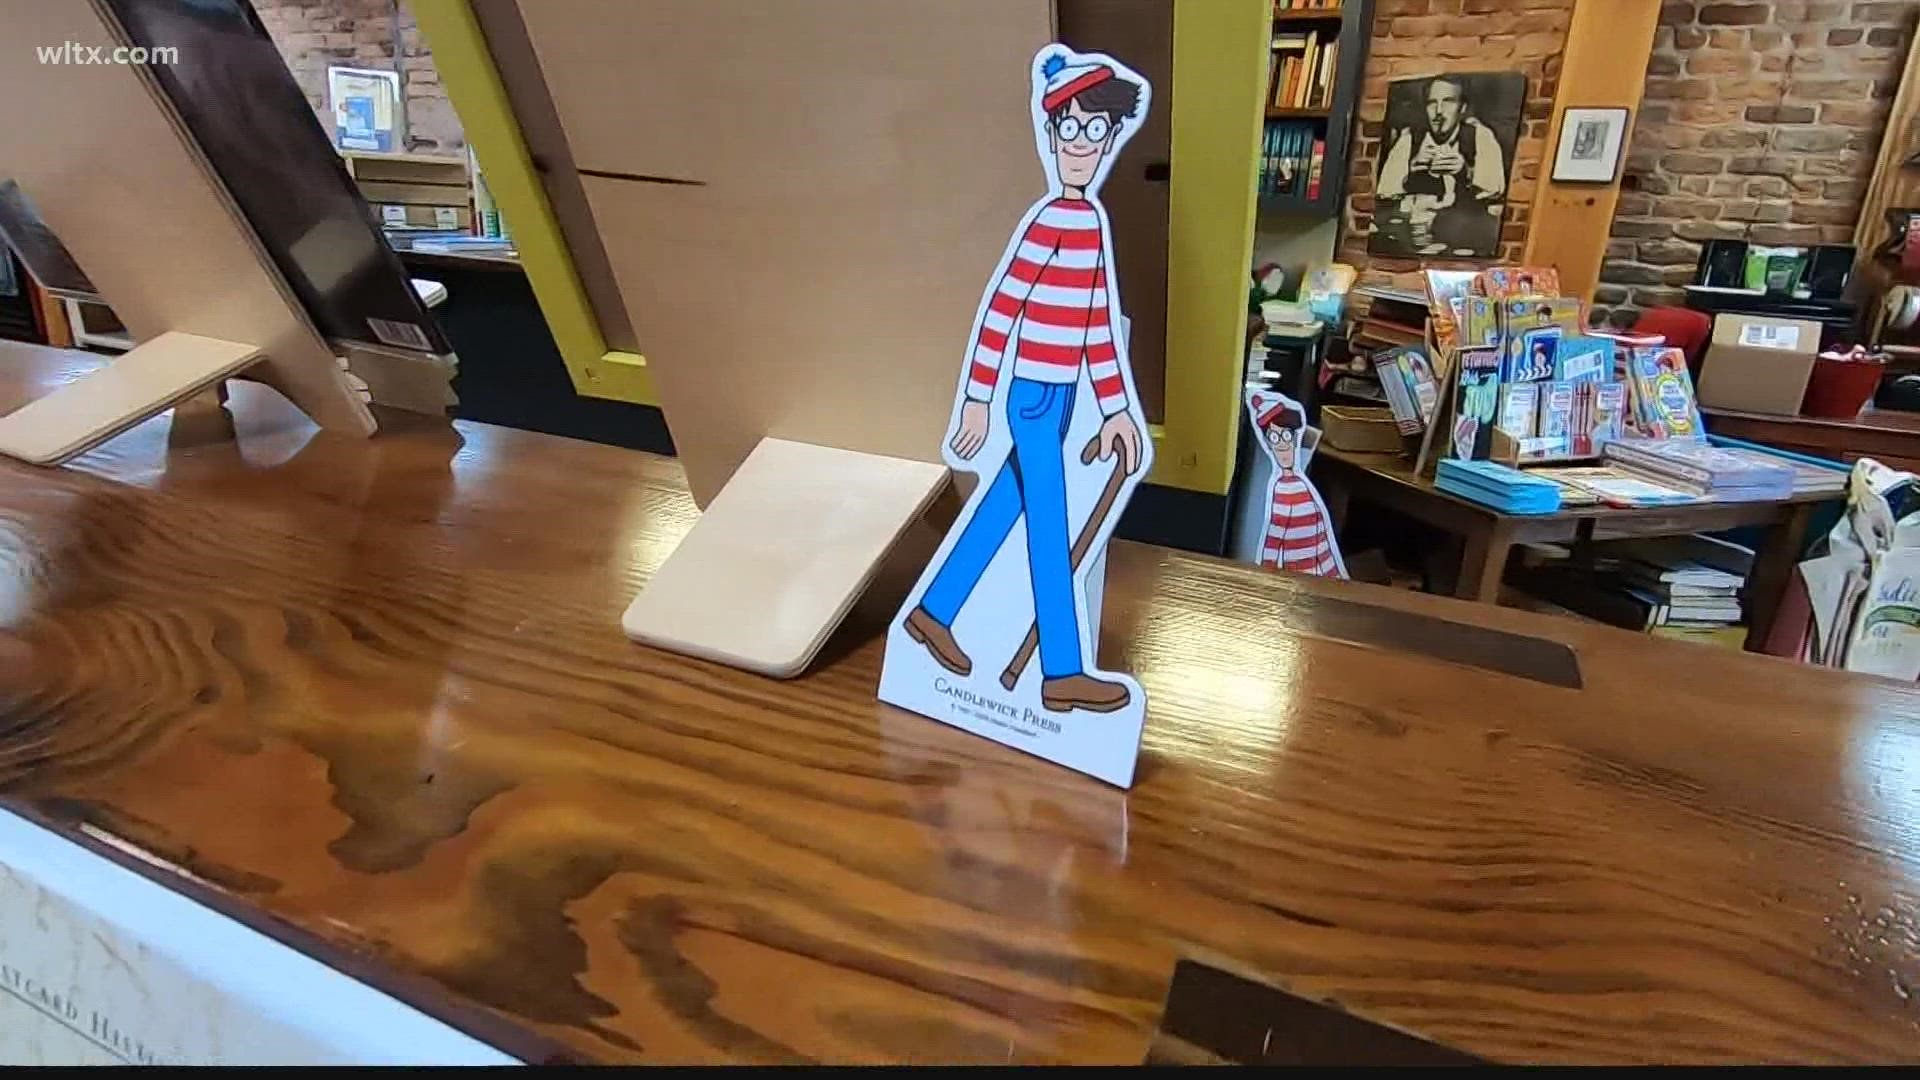 The city is taking part in an initiative to get people looking for Waldo in their businesses.